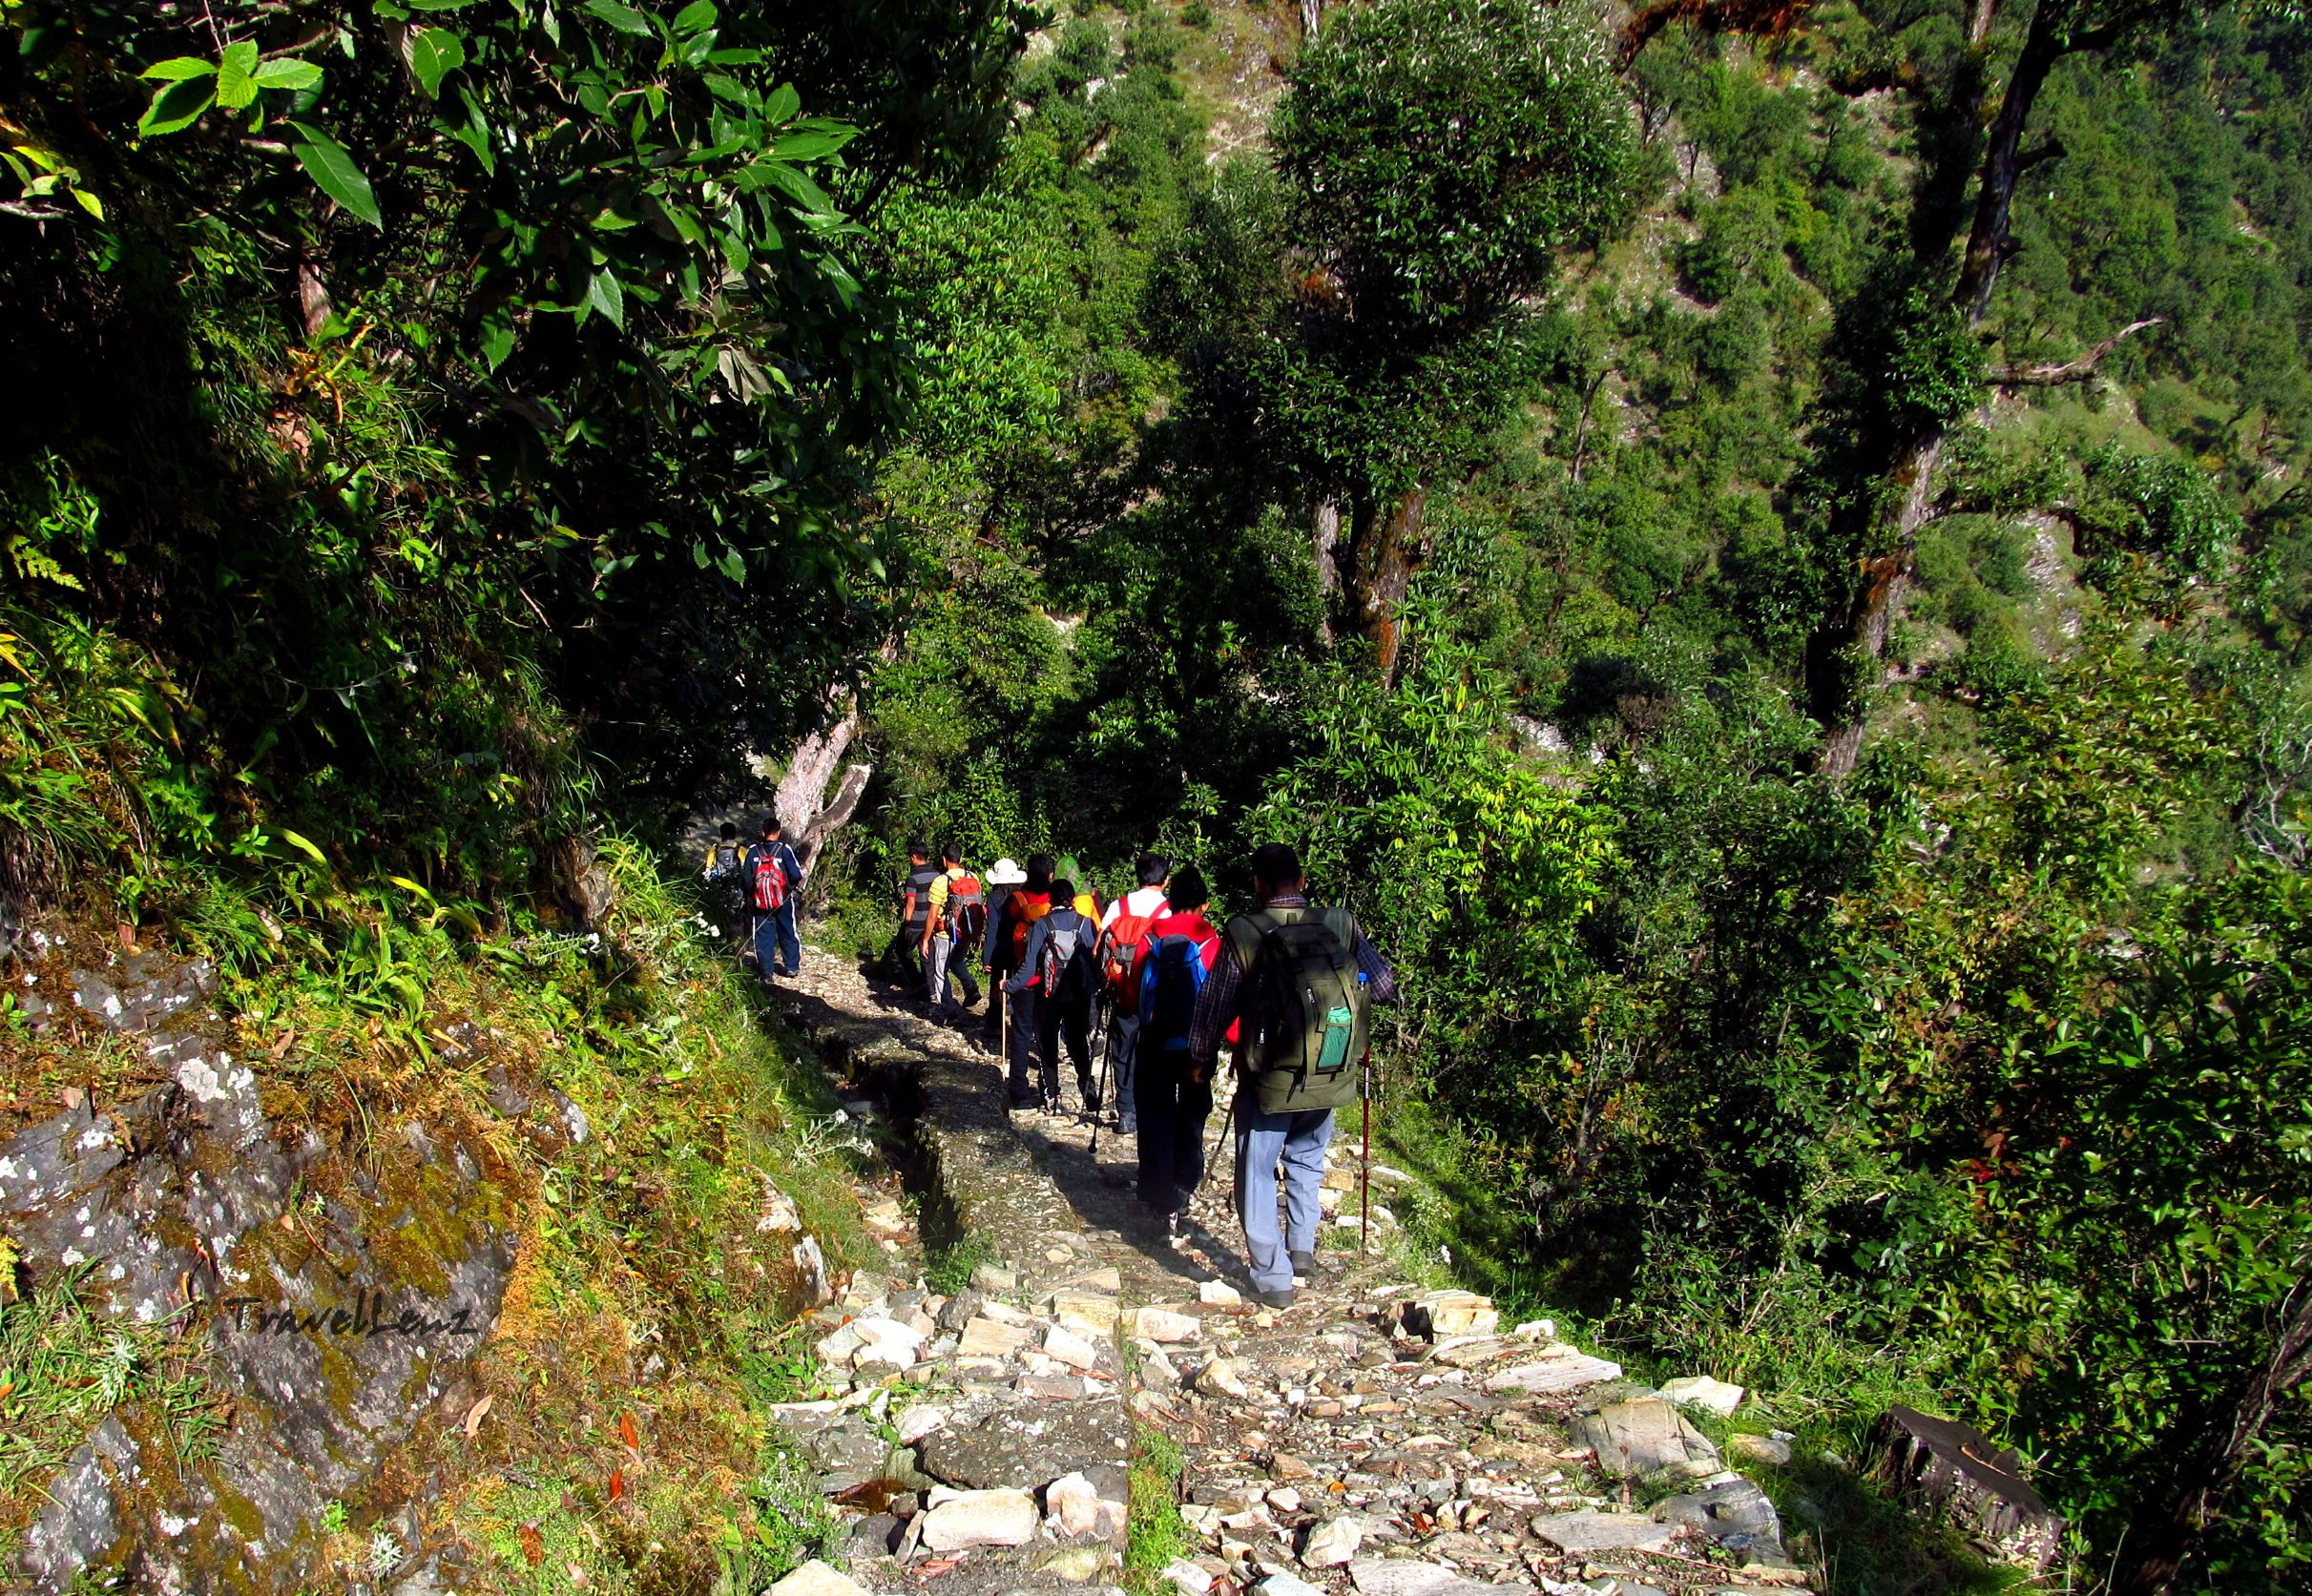 Trekkers taking a downhill path through a forest